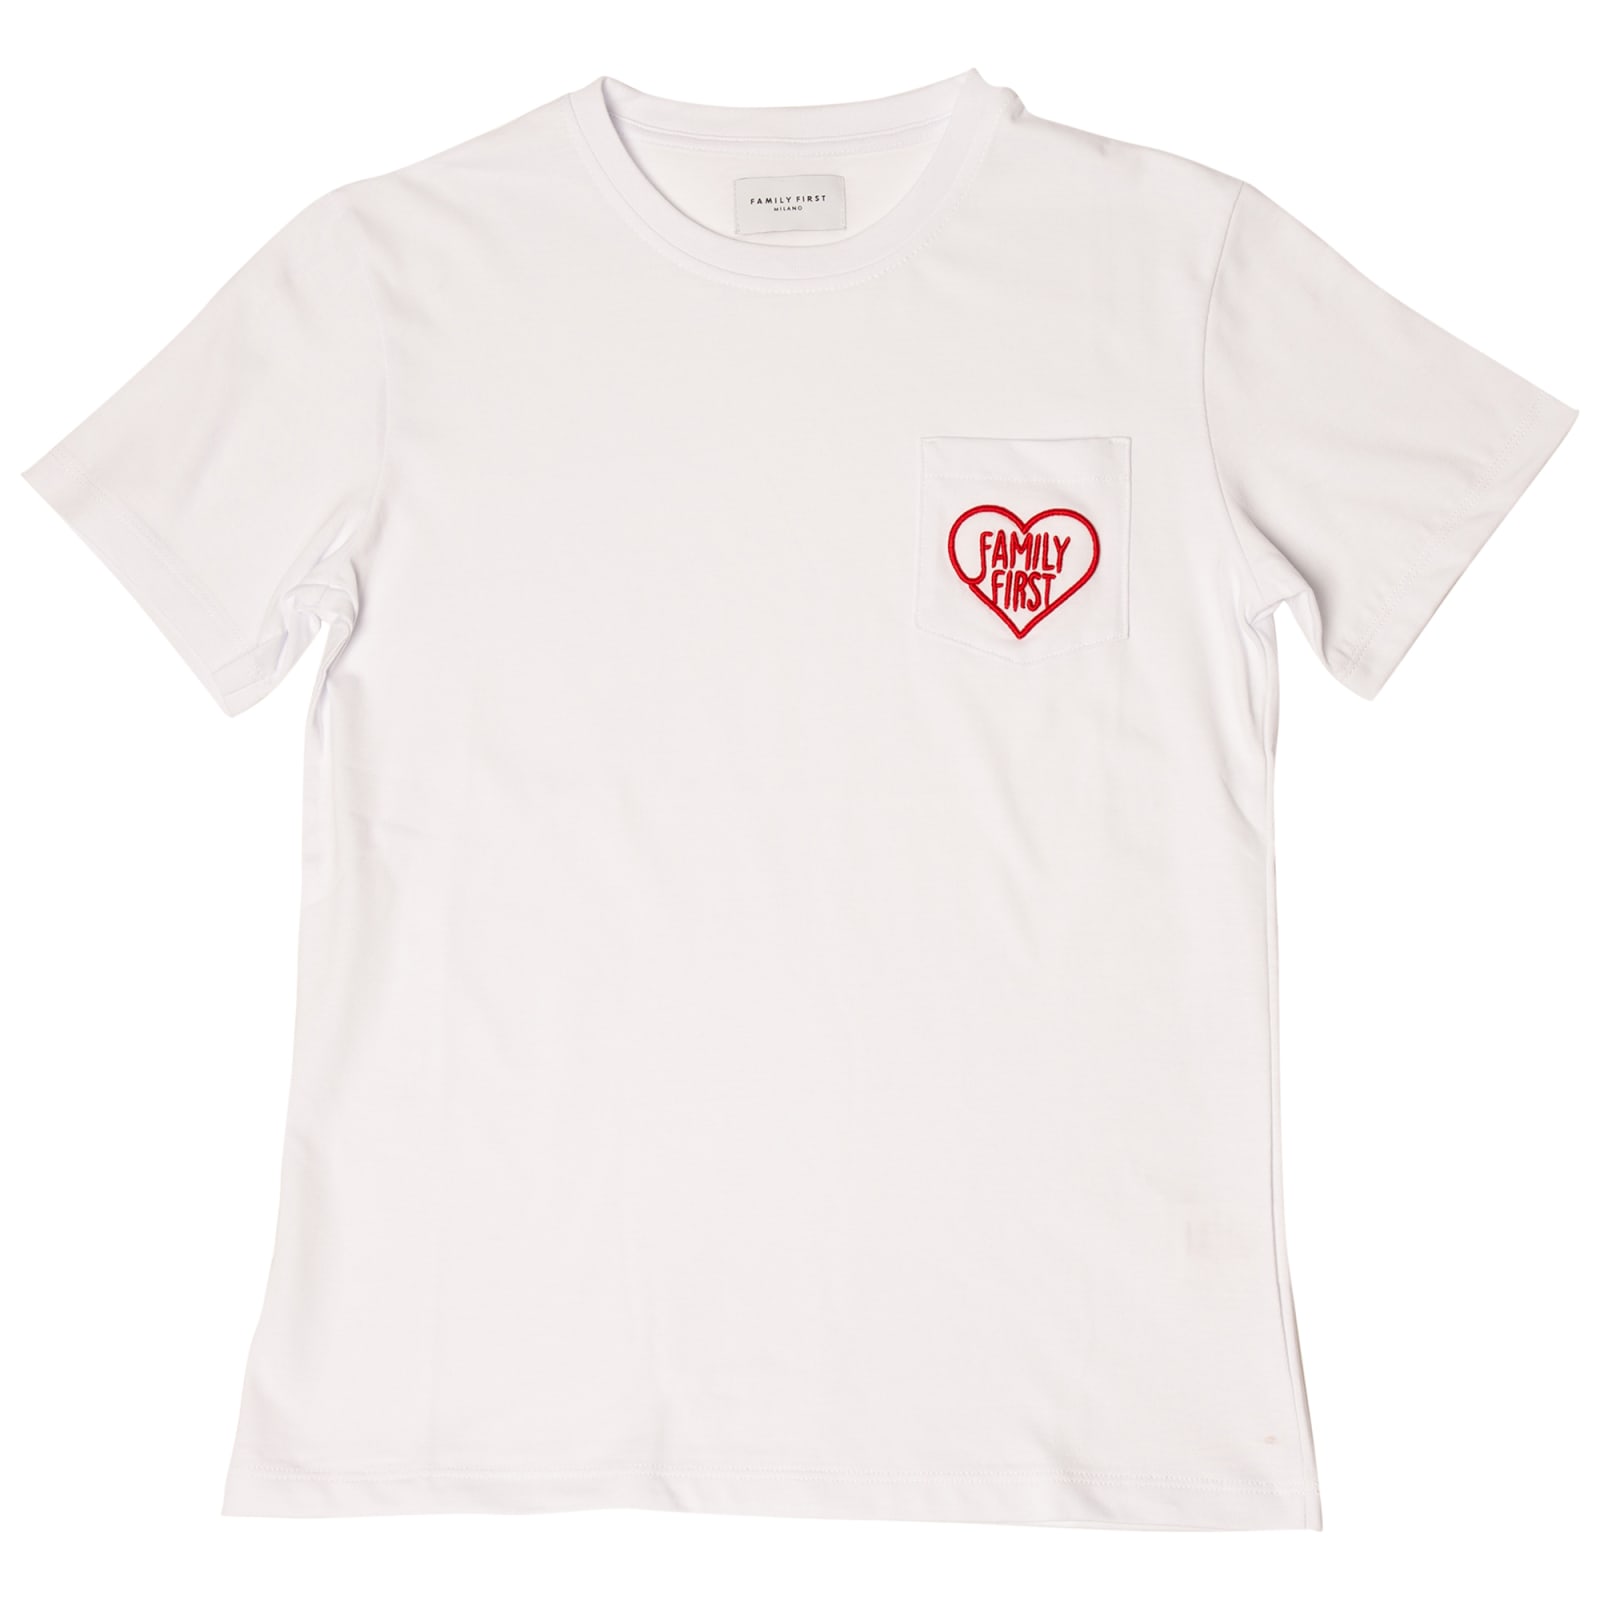 Family First Milano Kids' T-shirt In Bianco